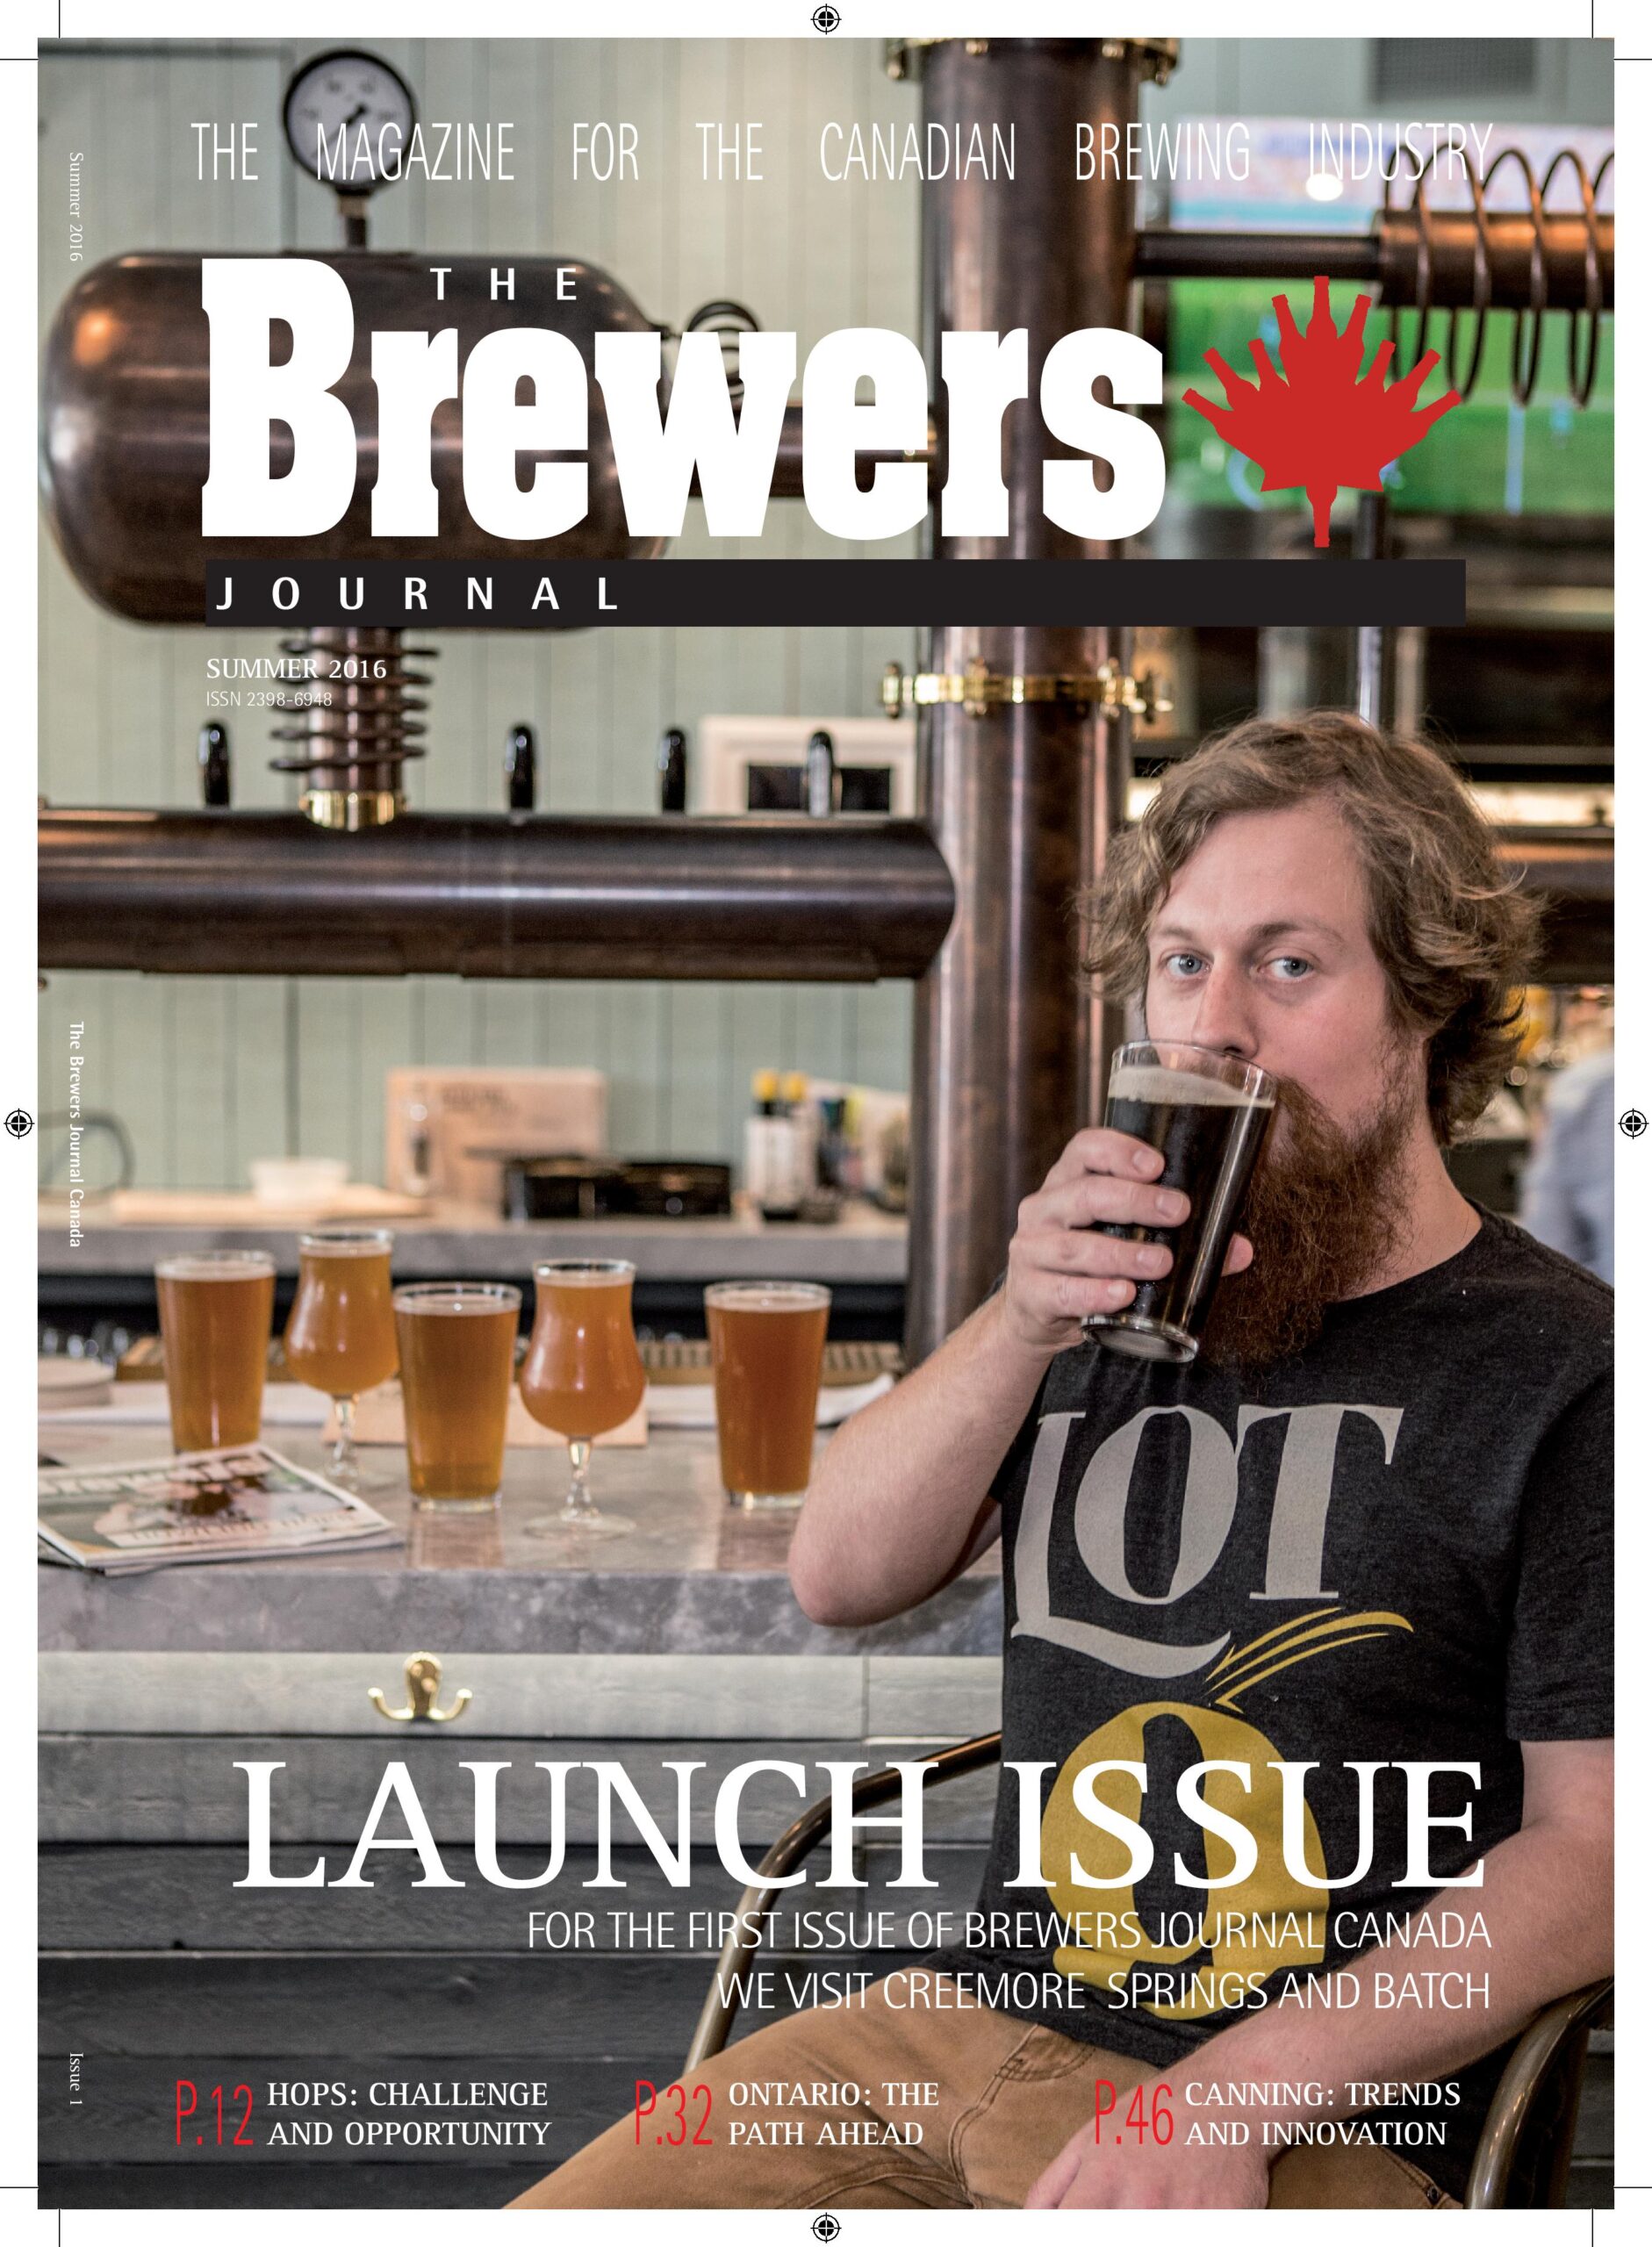 Nameless-Productions© Brewers-Journal-Canada-Summer 2016